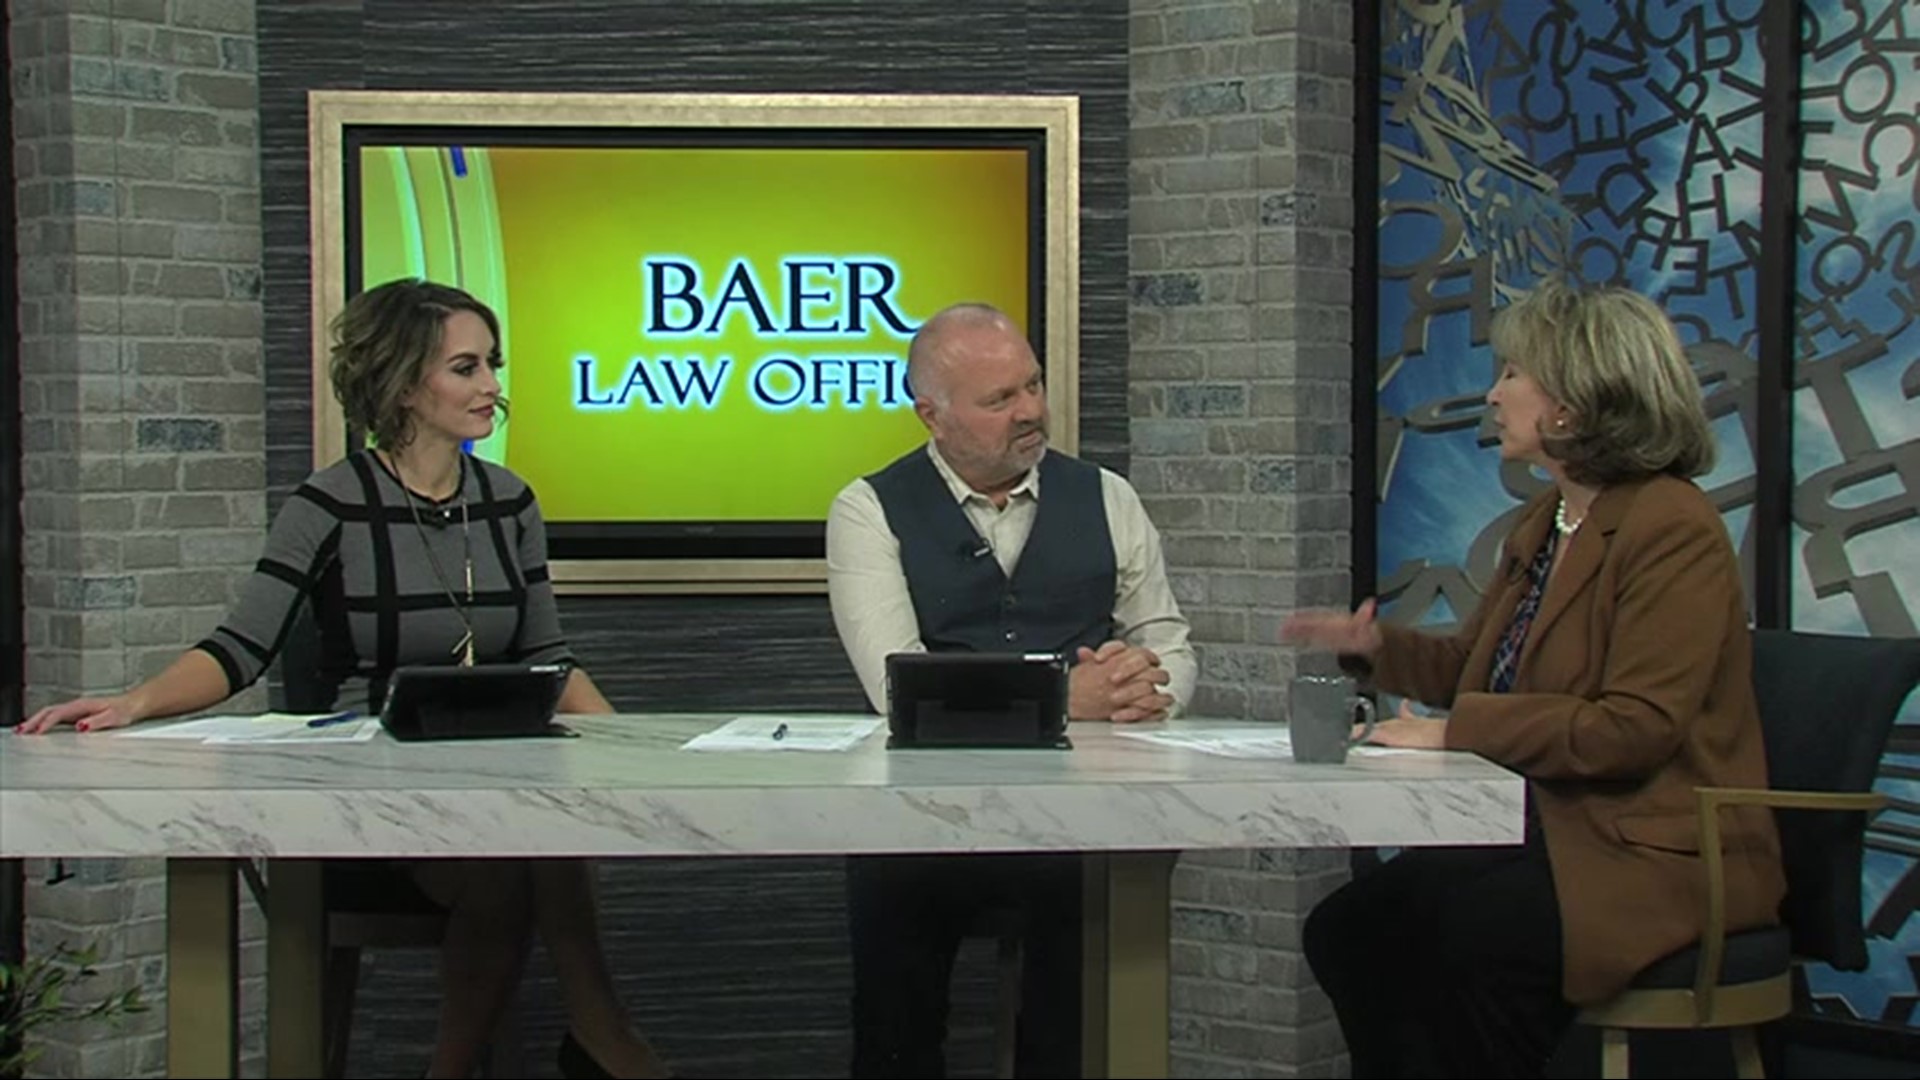 Baer Law: Divorce and paying for kids' college